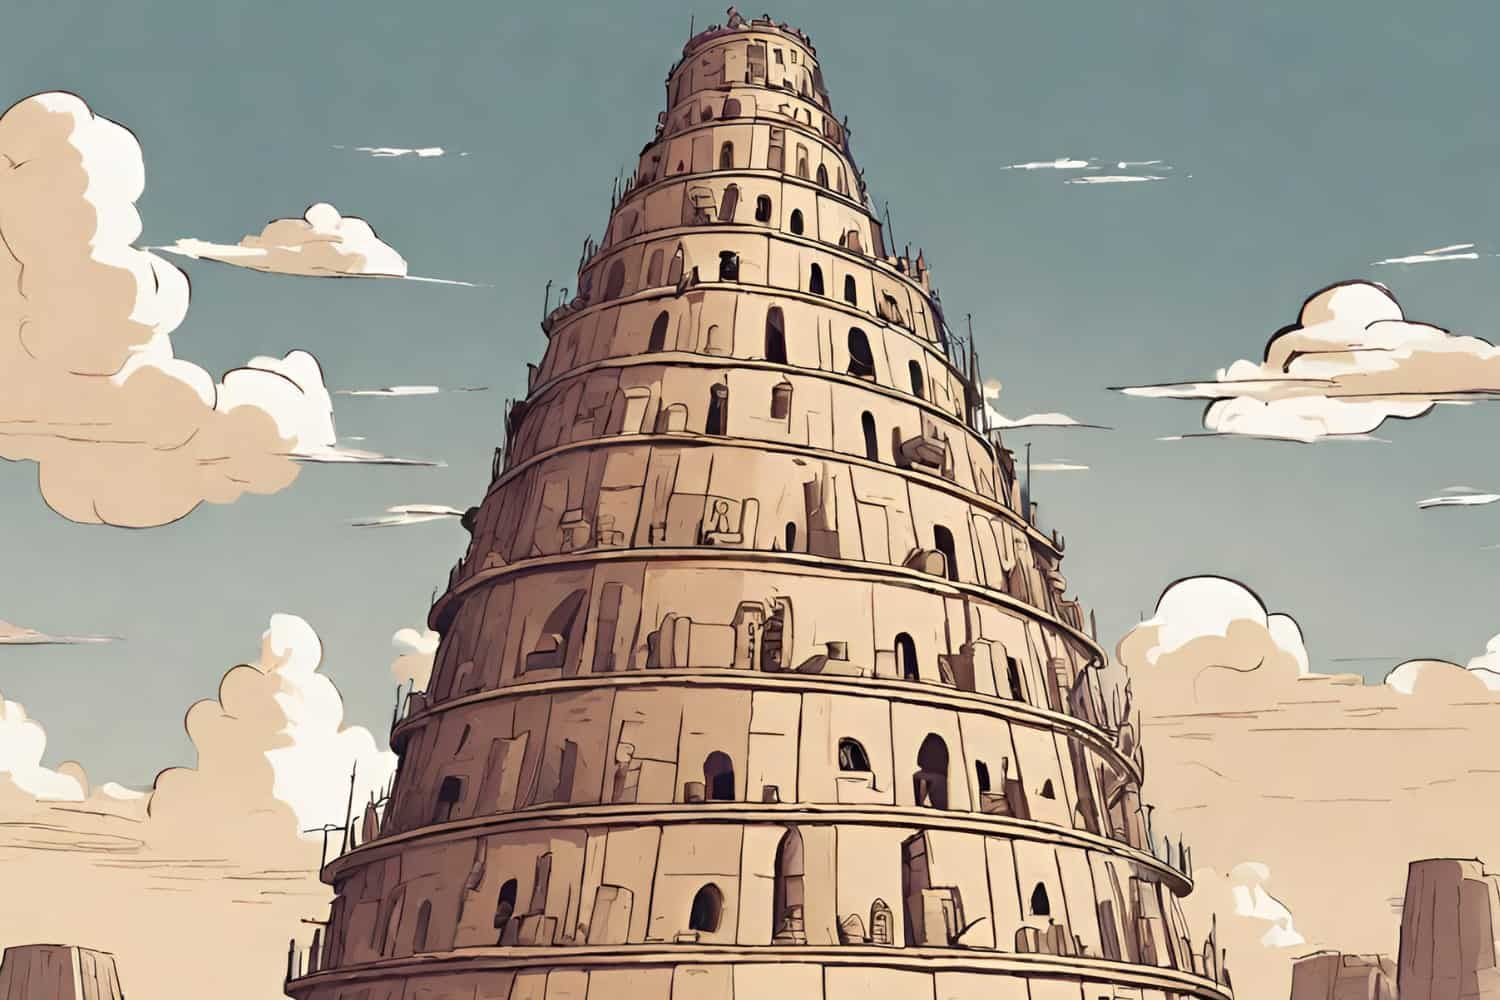 Lesson%20-%20Genesis%20-%20The%20tower%20of%20Babel-4d7b8bb5 Heaven / eternity